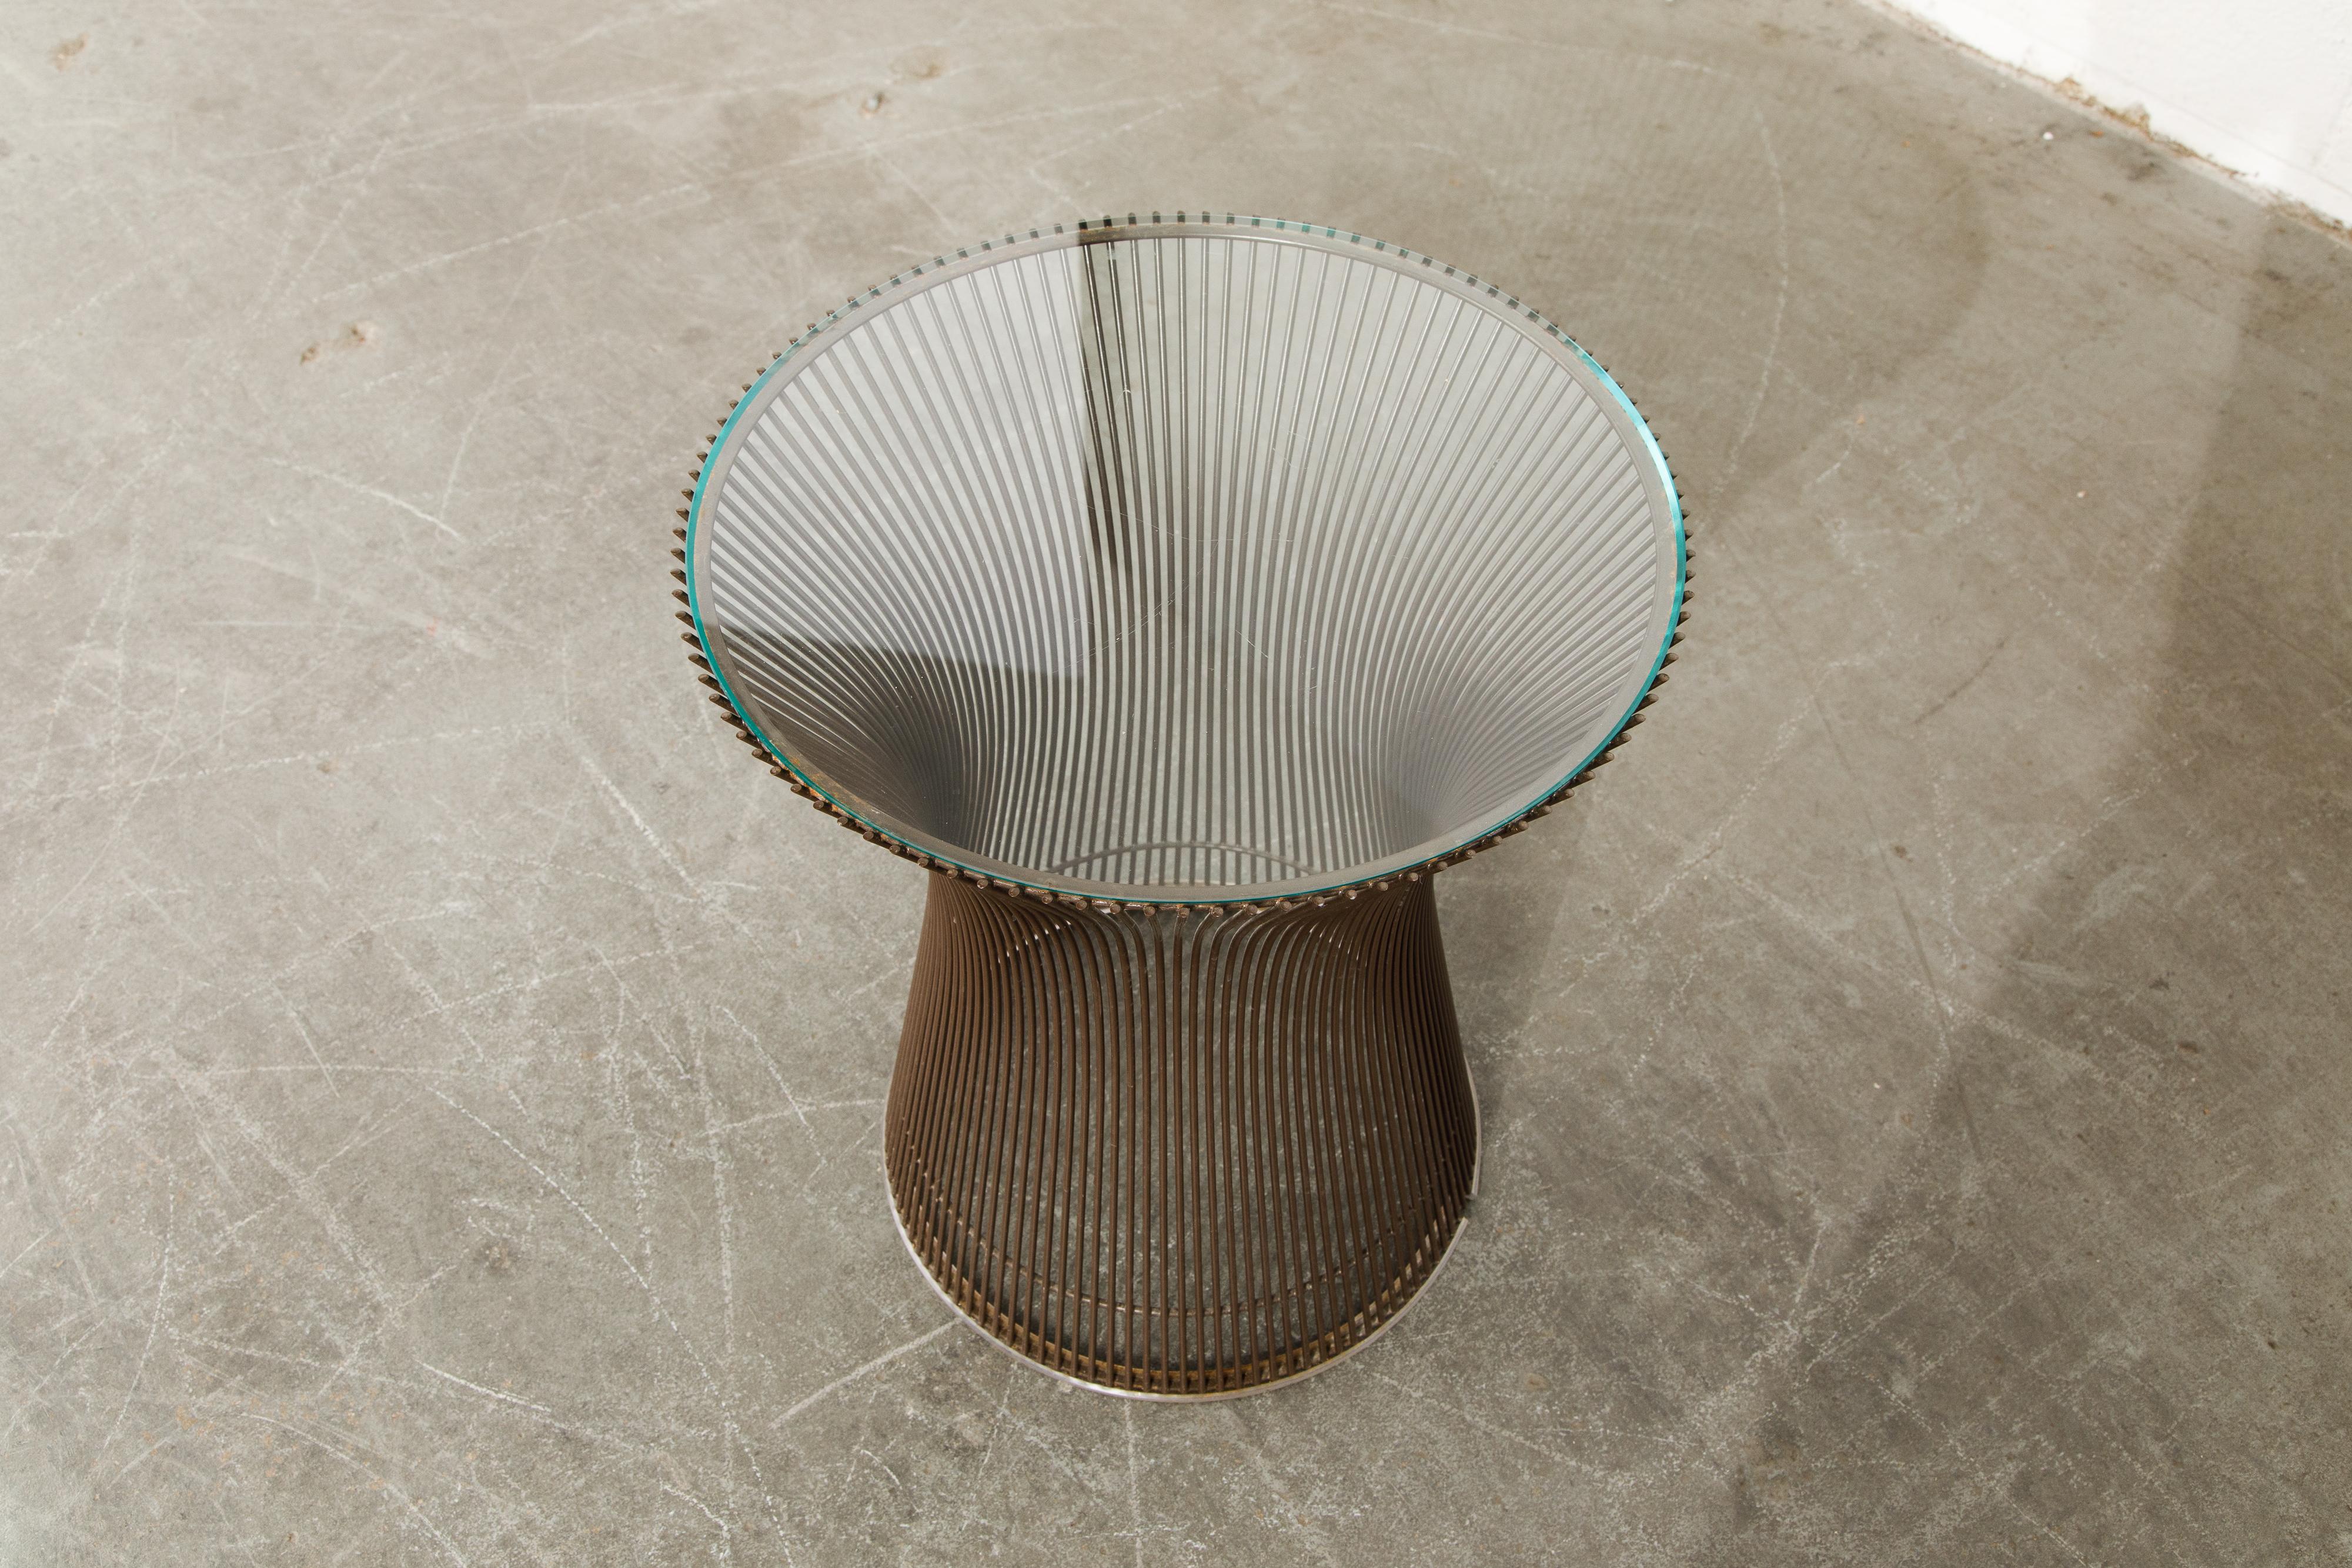 Late 20th Century Bronze Wire Side Table by Warren Platner for Knoll International, circa 1968